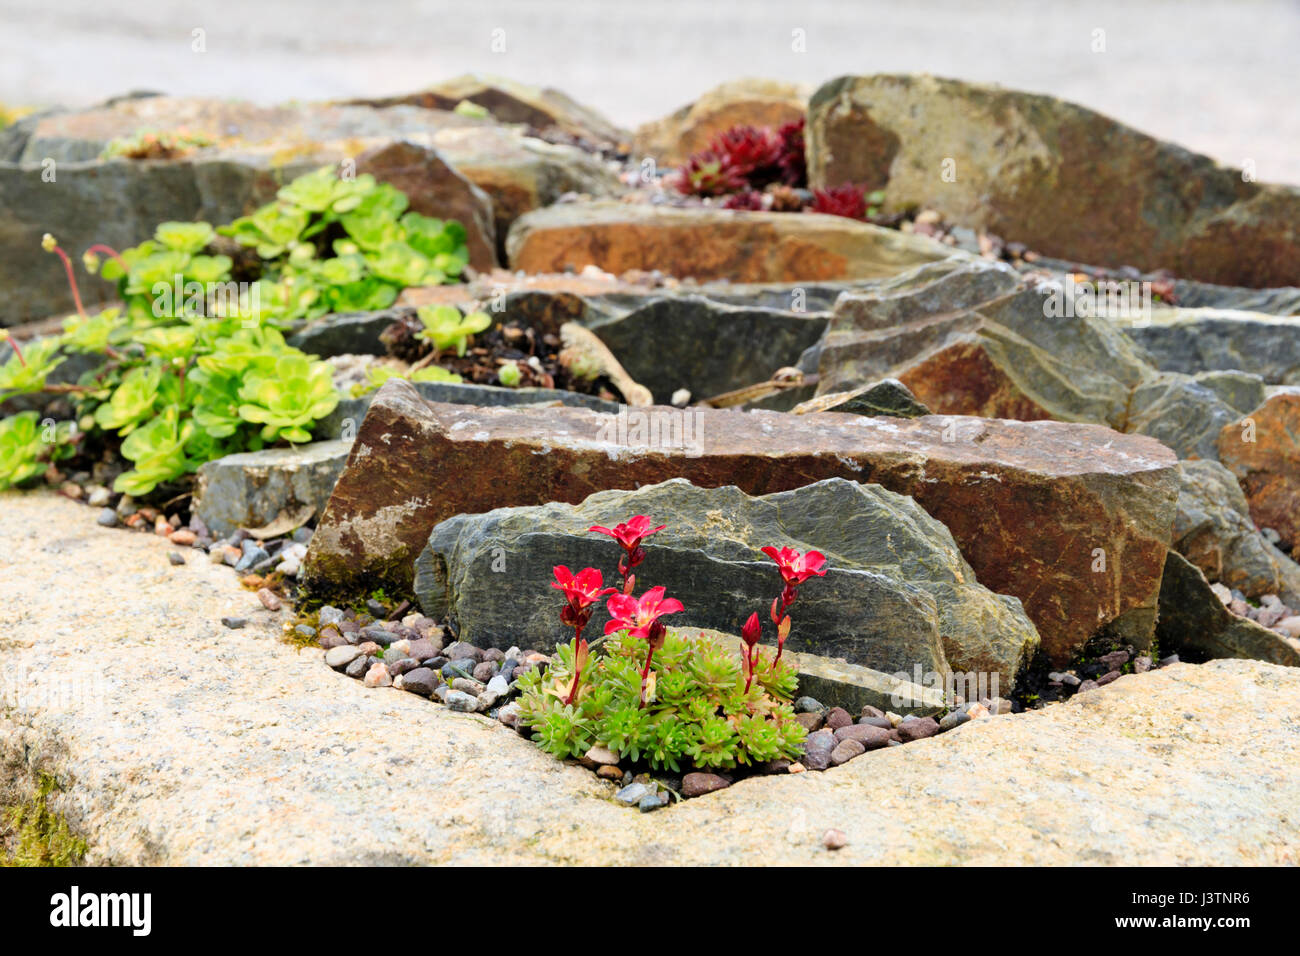 Close up, low angle view over an alpine trough with a red flowered saxifrage in the foreground Stock Photo